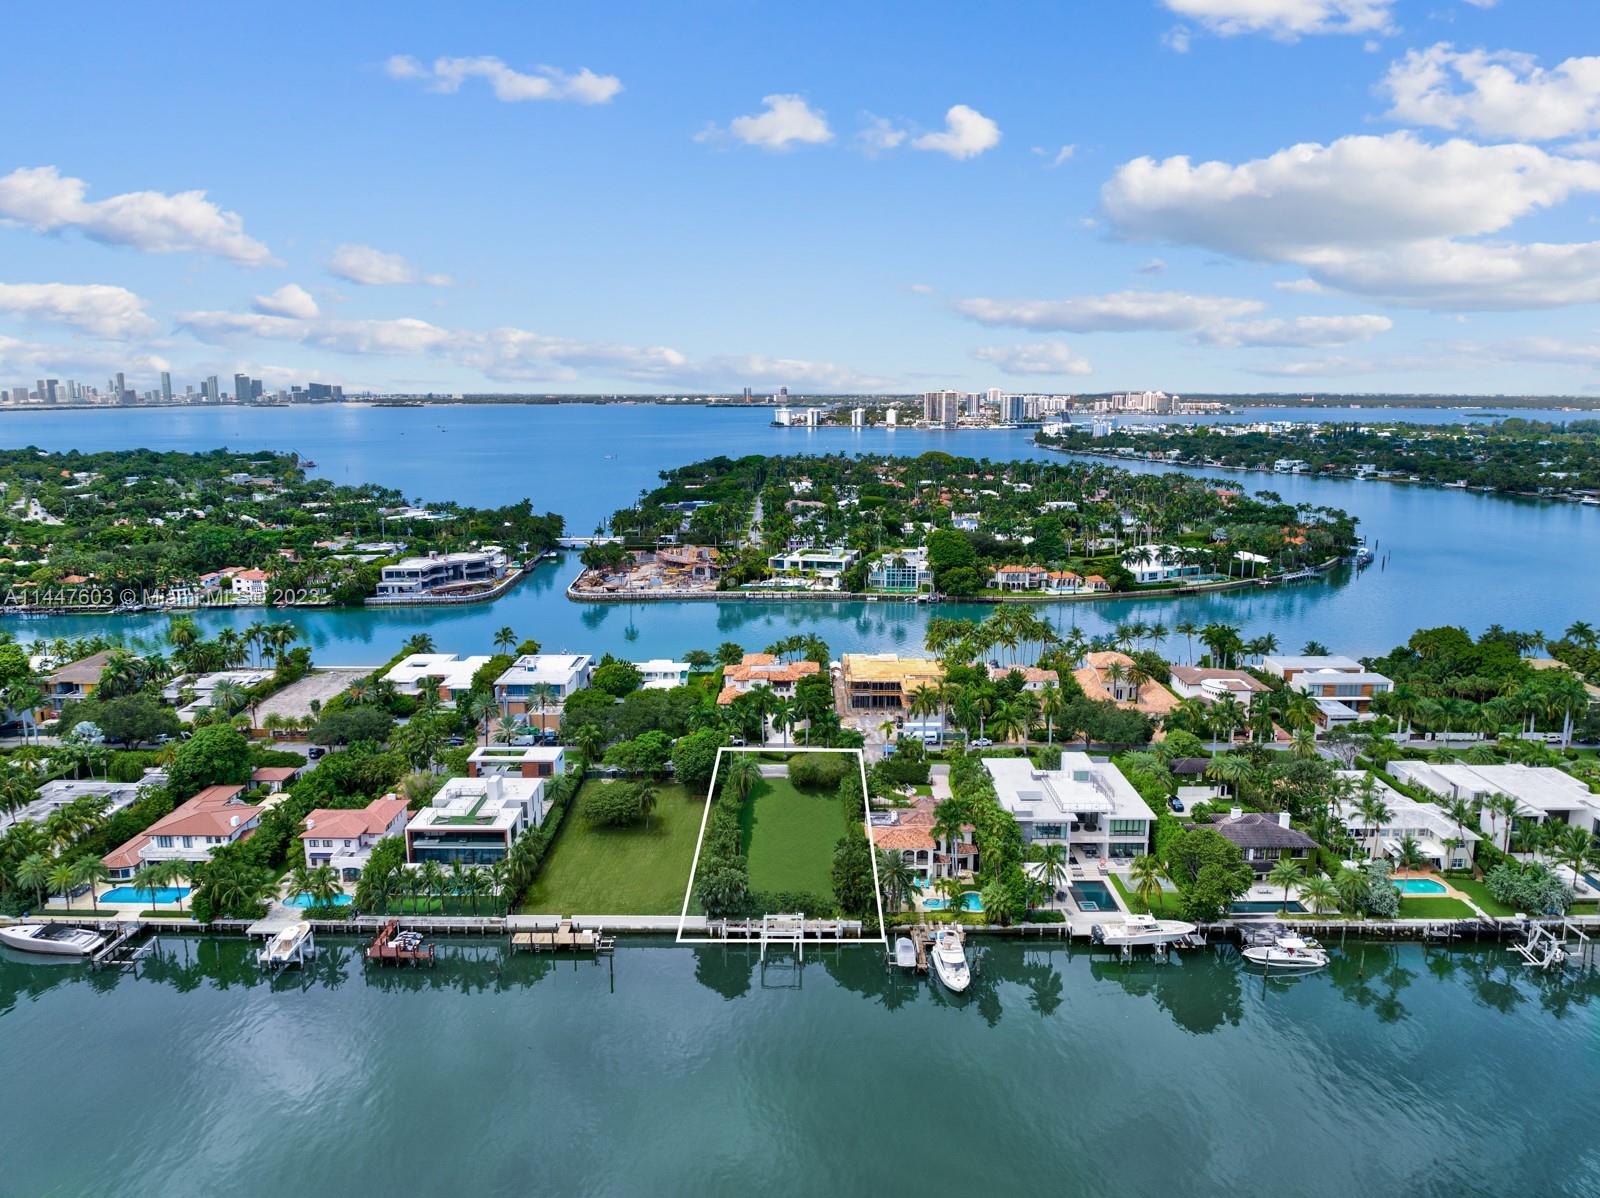 This exceptional property on Allison Island in Miami Beach presents a unique opportunity to build your dream home in one of the city's most exclusive gated communities. With breathtaking water views & stunning sunrises as your daily backdrop, this is a setting like no other. Included in this offering are fully permitted architectural plans by renowned architect Cesar Molina. These plans are designed for a modern tropical masterpiece boasting 7 bedrooms & 7 bathrooms, spread across 8,000 square feet of luxurious interior space. With a generous 16,200-square-foot lot, this property boasts an impressive 75 feet of water frontage along with a brand-new seawall, dock & lift. This property features a charming Mediterranean home with 4 bedrooms. The home offers a comfortable & spacious interior